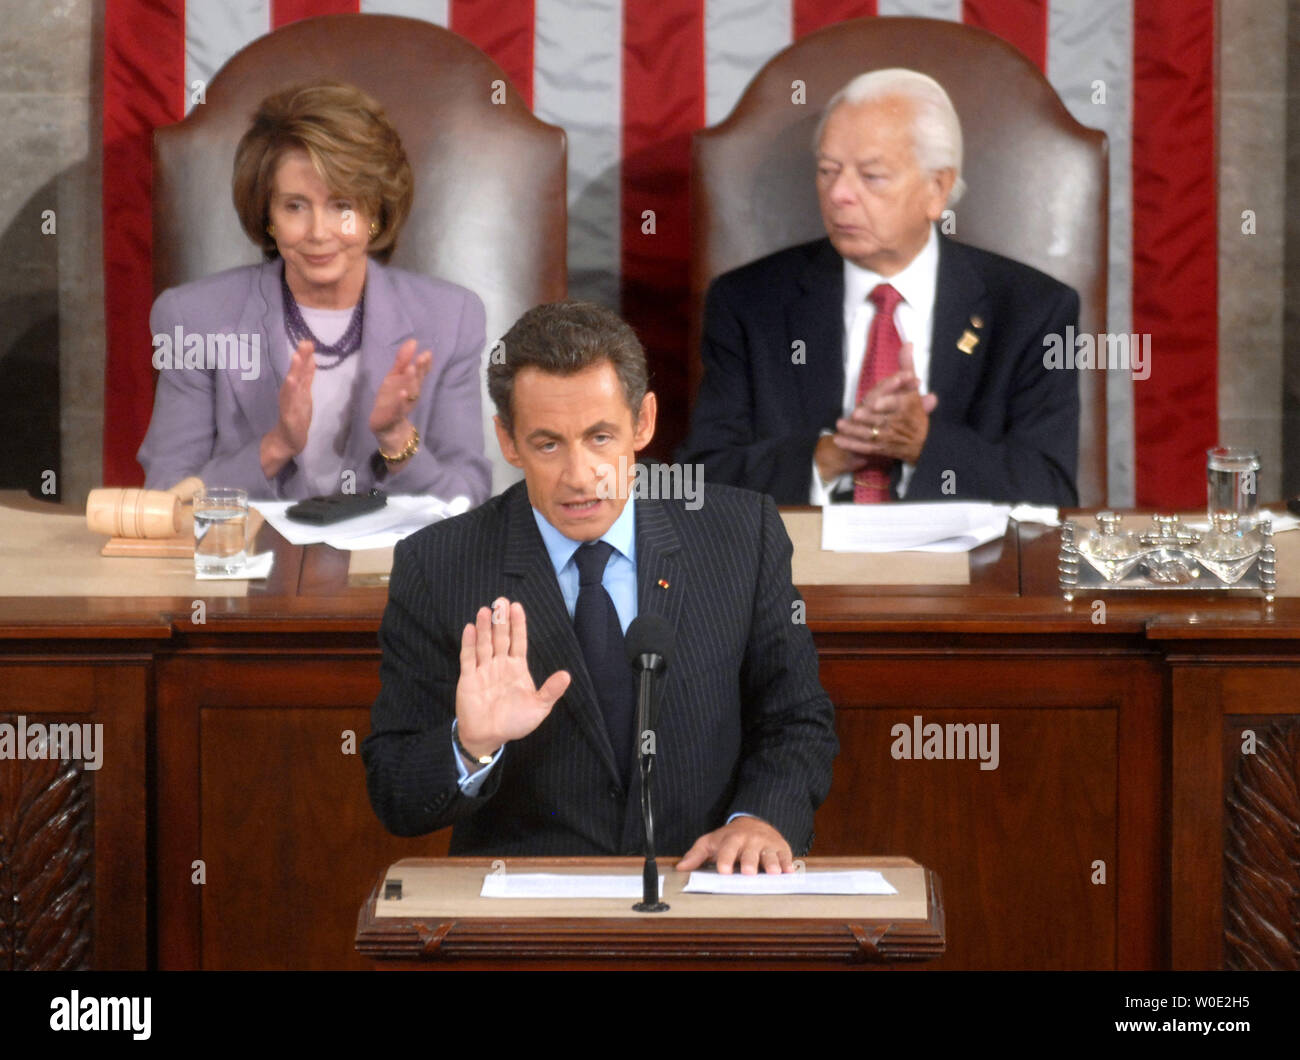 French President Nicolas Sarkozy addresses a joint meeting of Congress at the Capitol Building in Washington on November 7, 2007. House Majority Leader Nancy Pelosi and Senate President Pro Tempore Sen. Robert Byrd (D-WV) watched on. (UPI Photo/Kevin Dietsch) Stock Photo